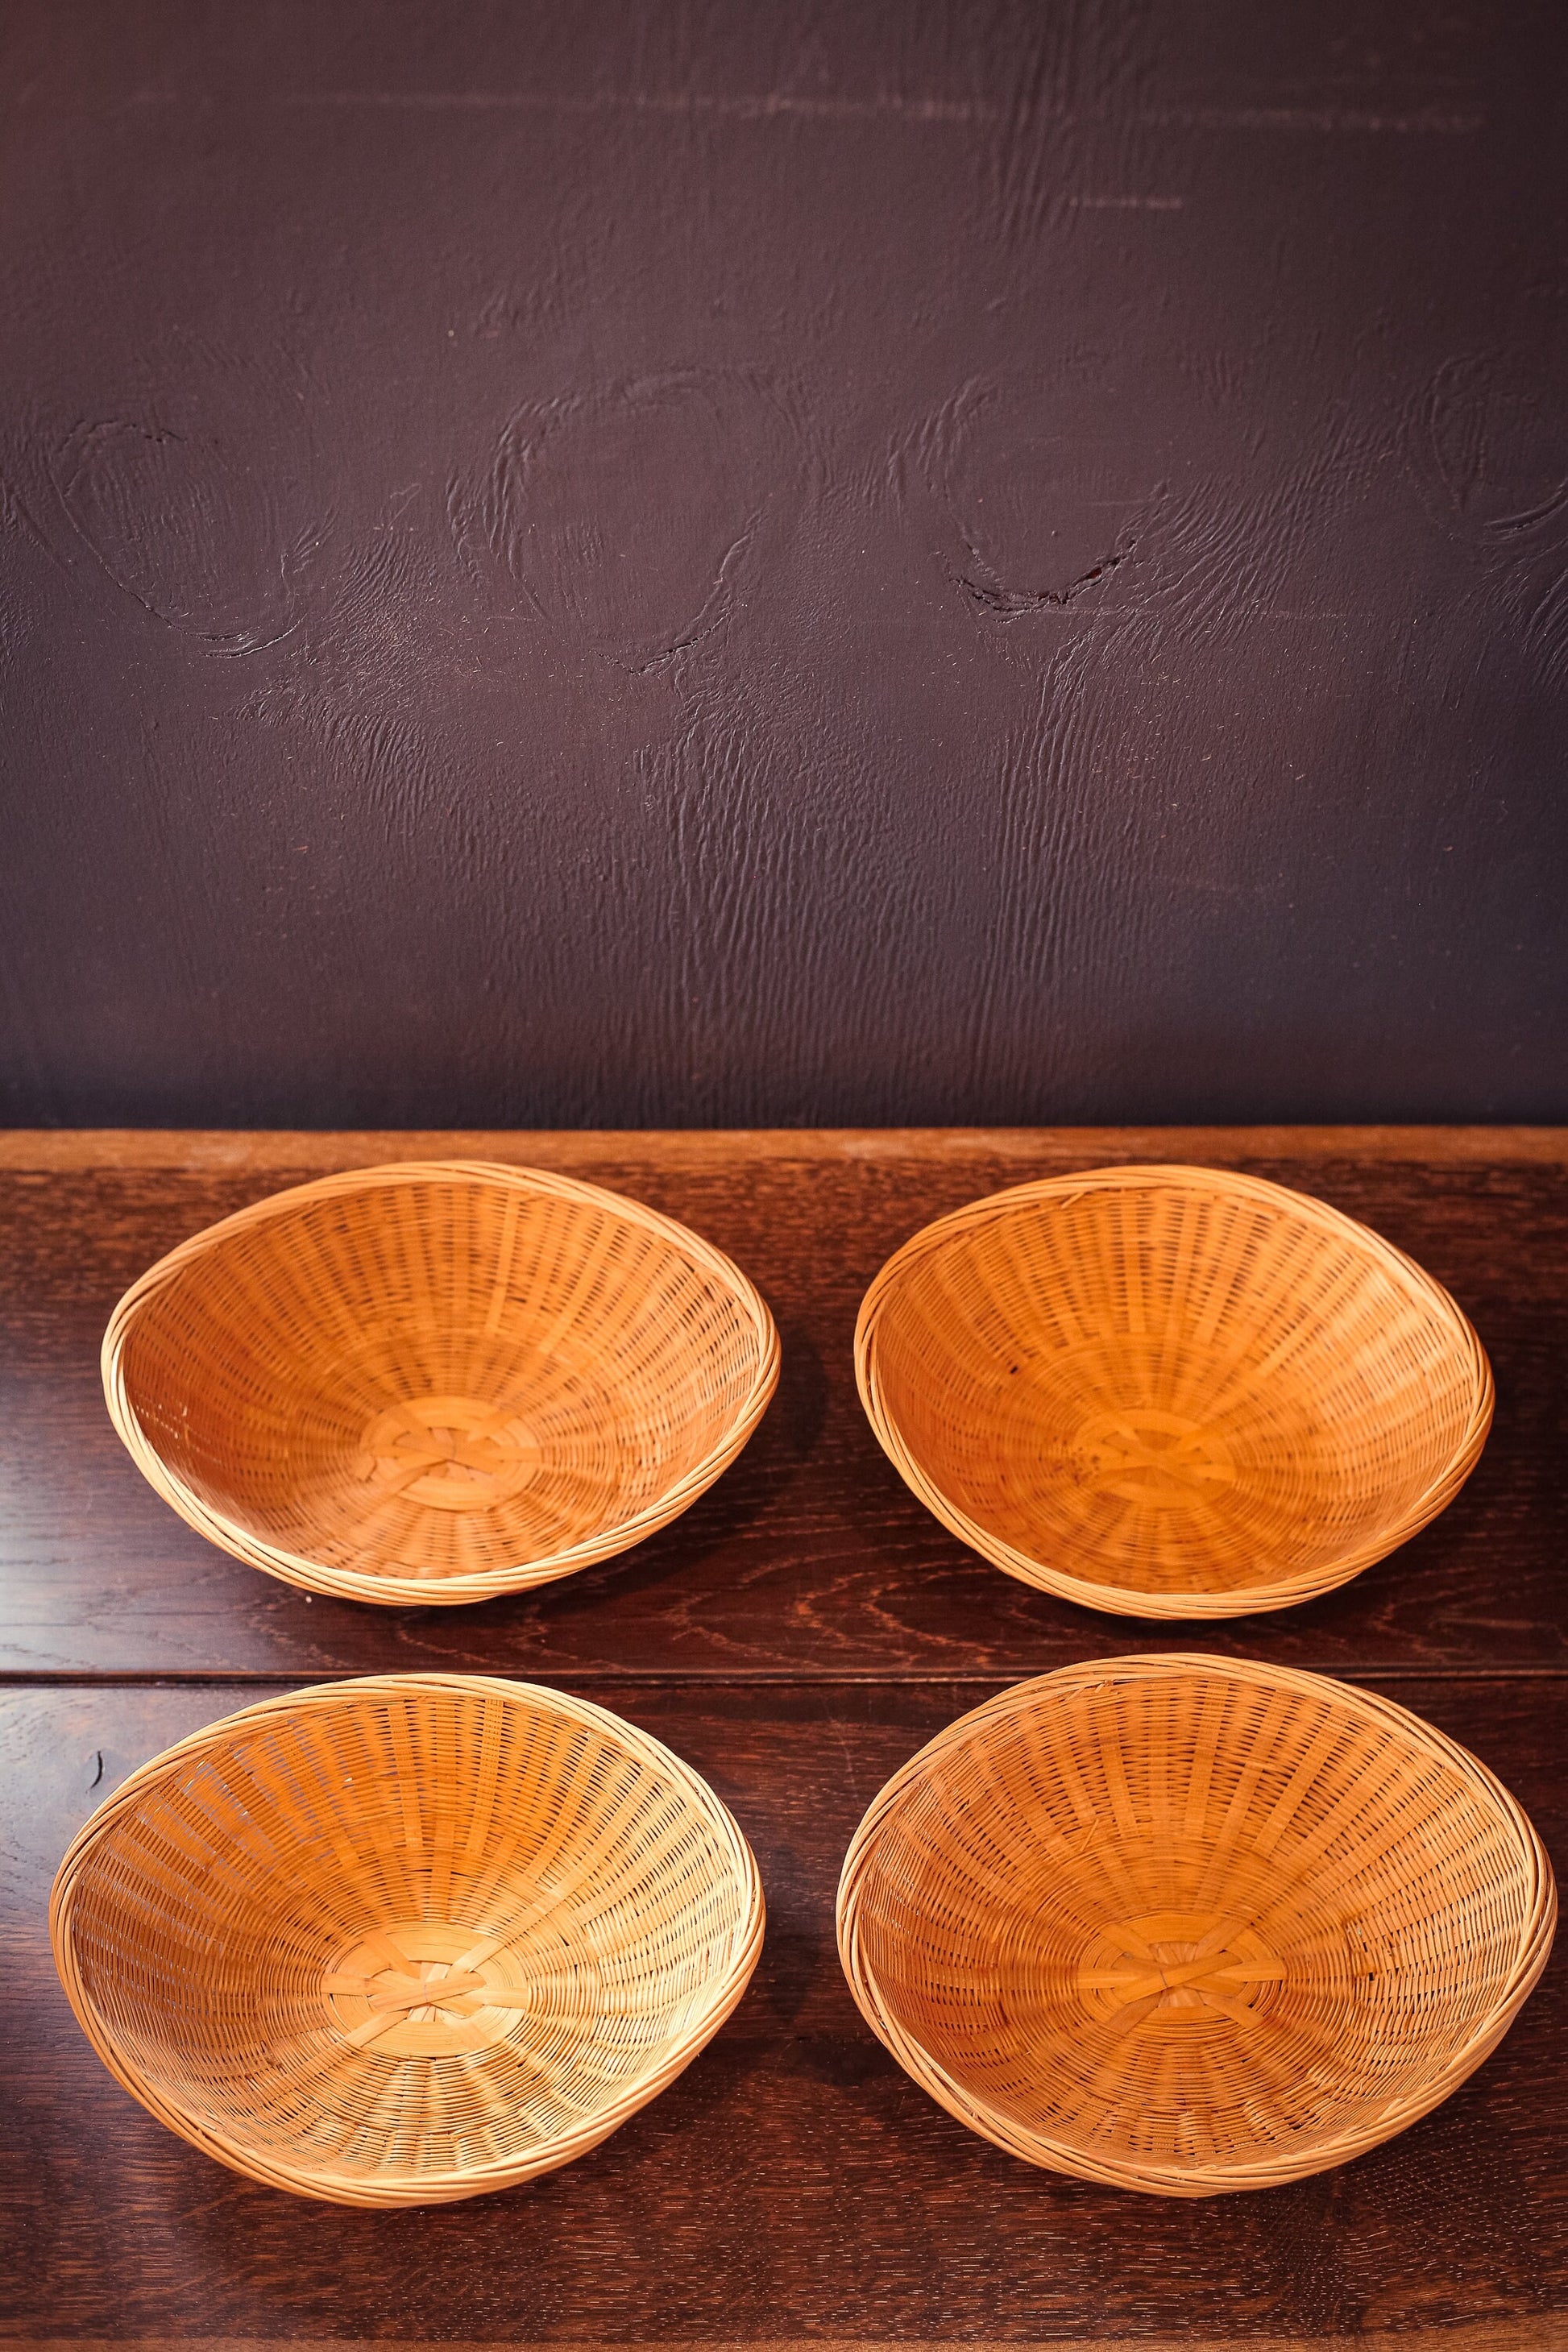 Set of 4 Vintage Bamboo Bread Roll Baskets - Vintage Small Wicker/Rattan Oval Baskets